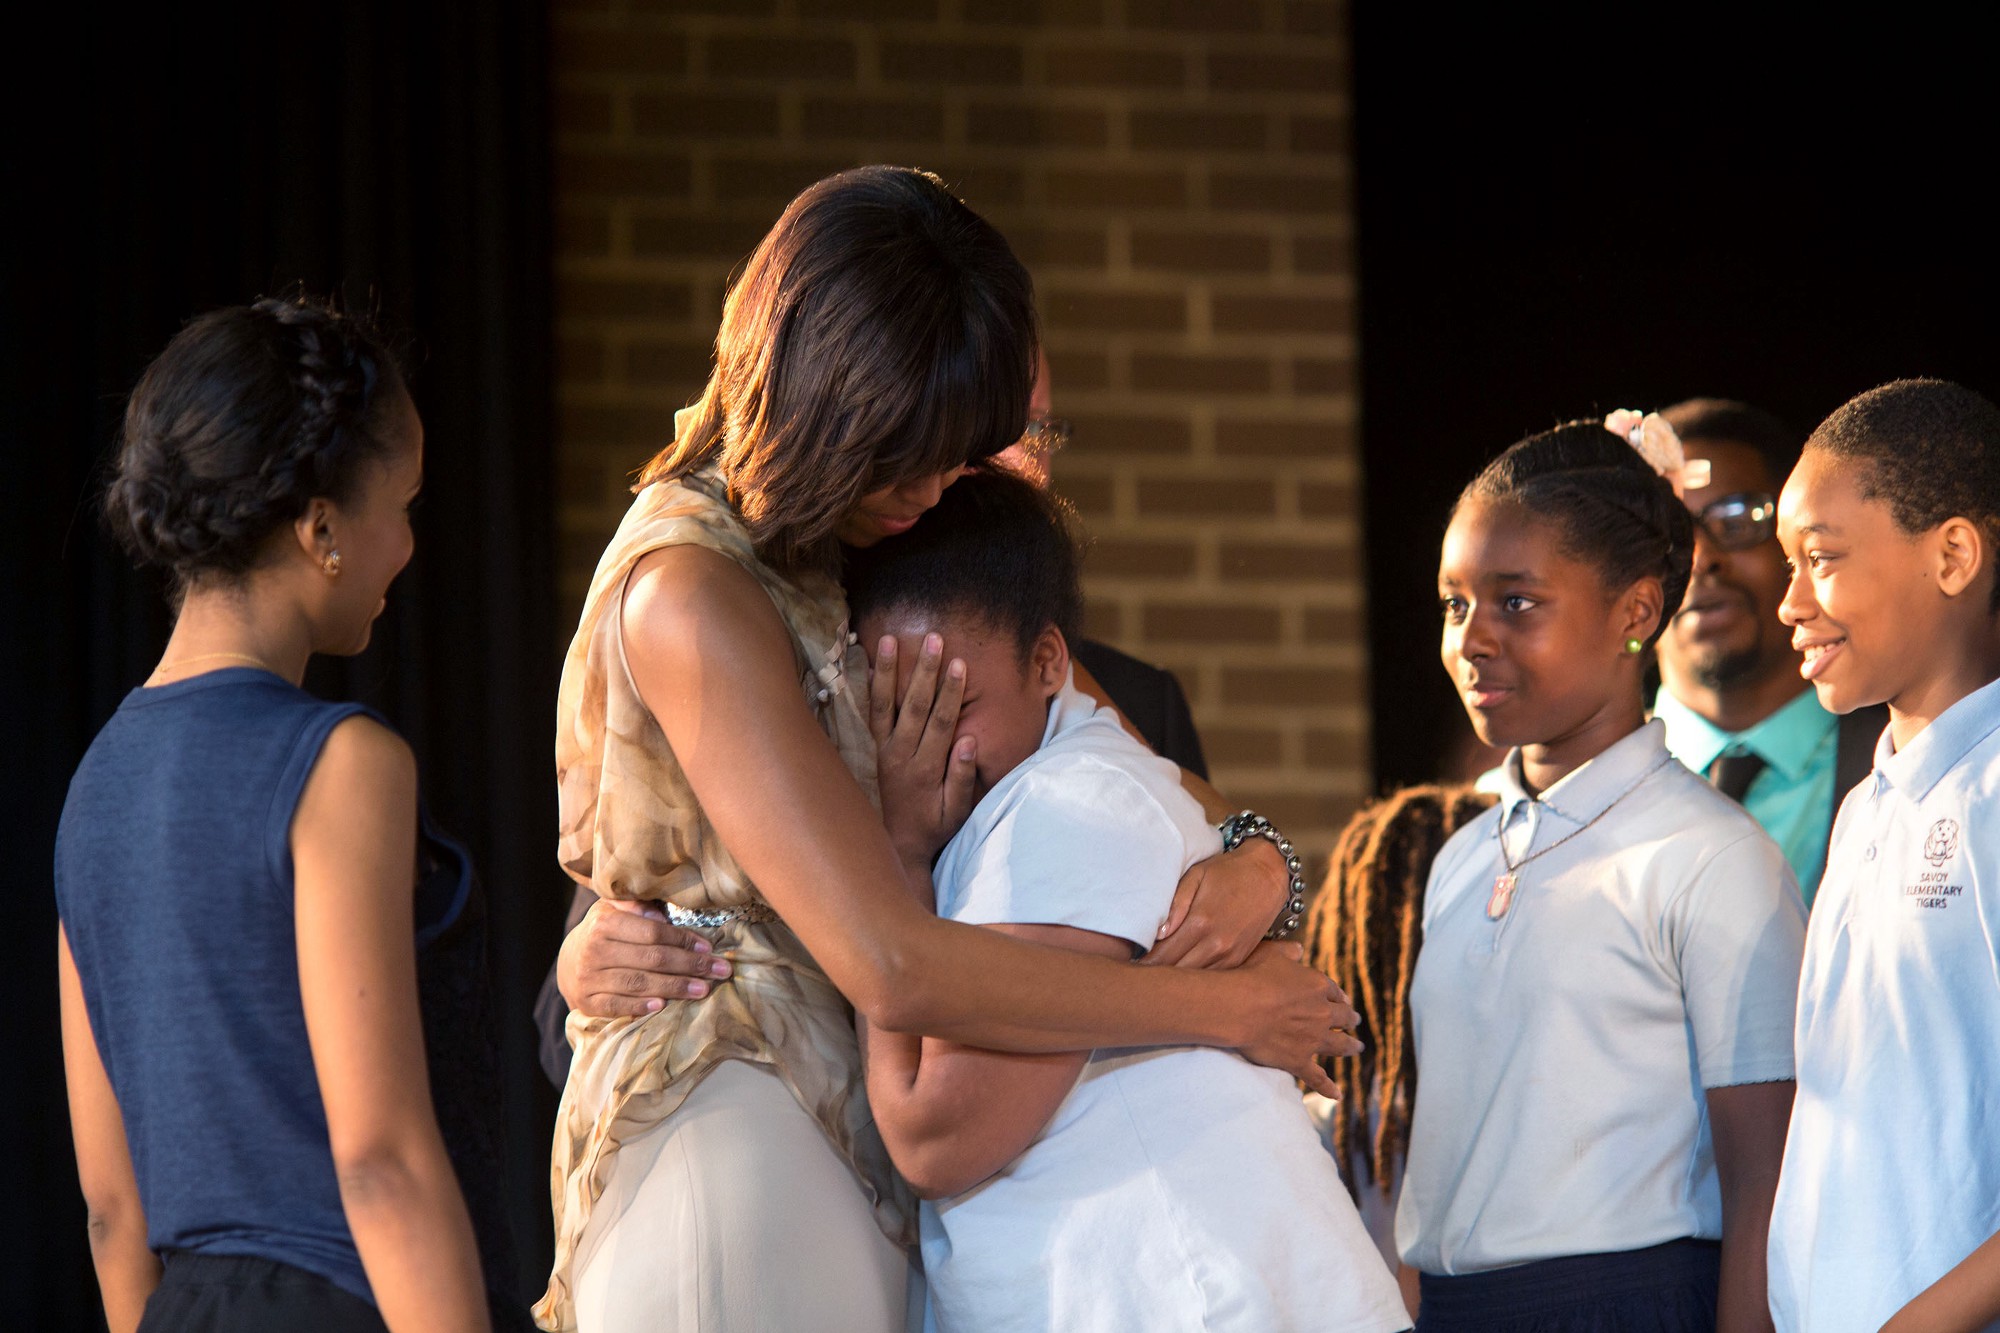 May 24, 2013. Greeting students with Kerry Washington after their performance at Savoy Elementary School in Washington, D.C. (Official White House Photo by Lawrence Jackson)